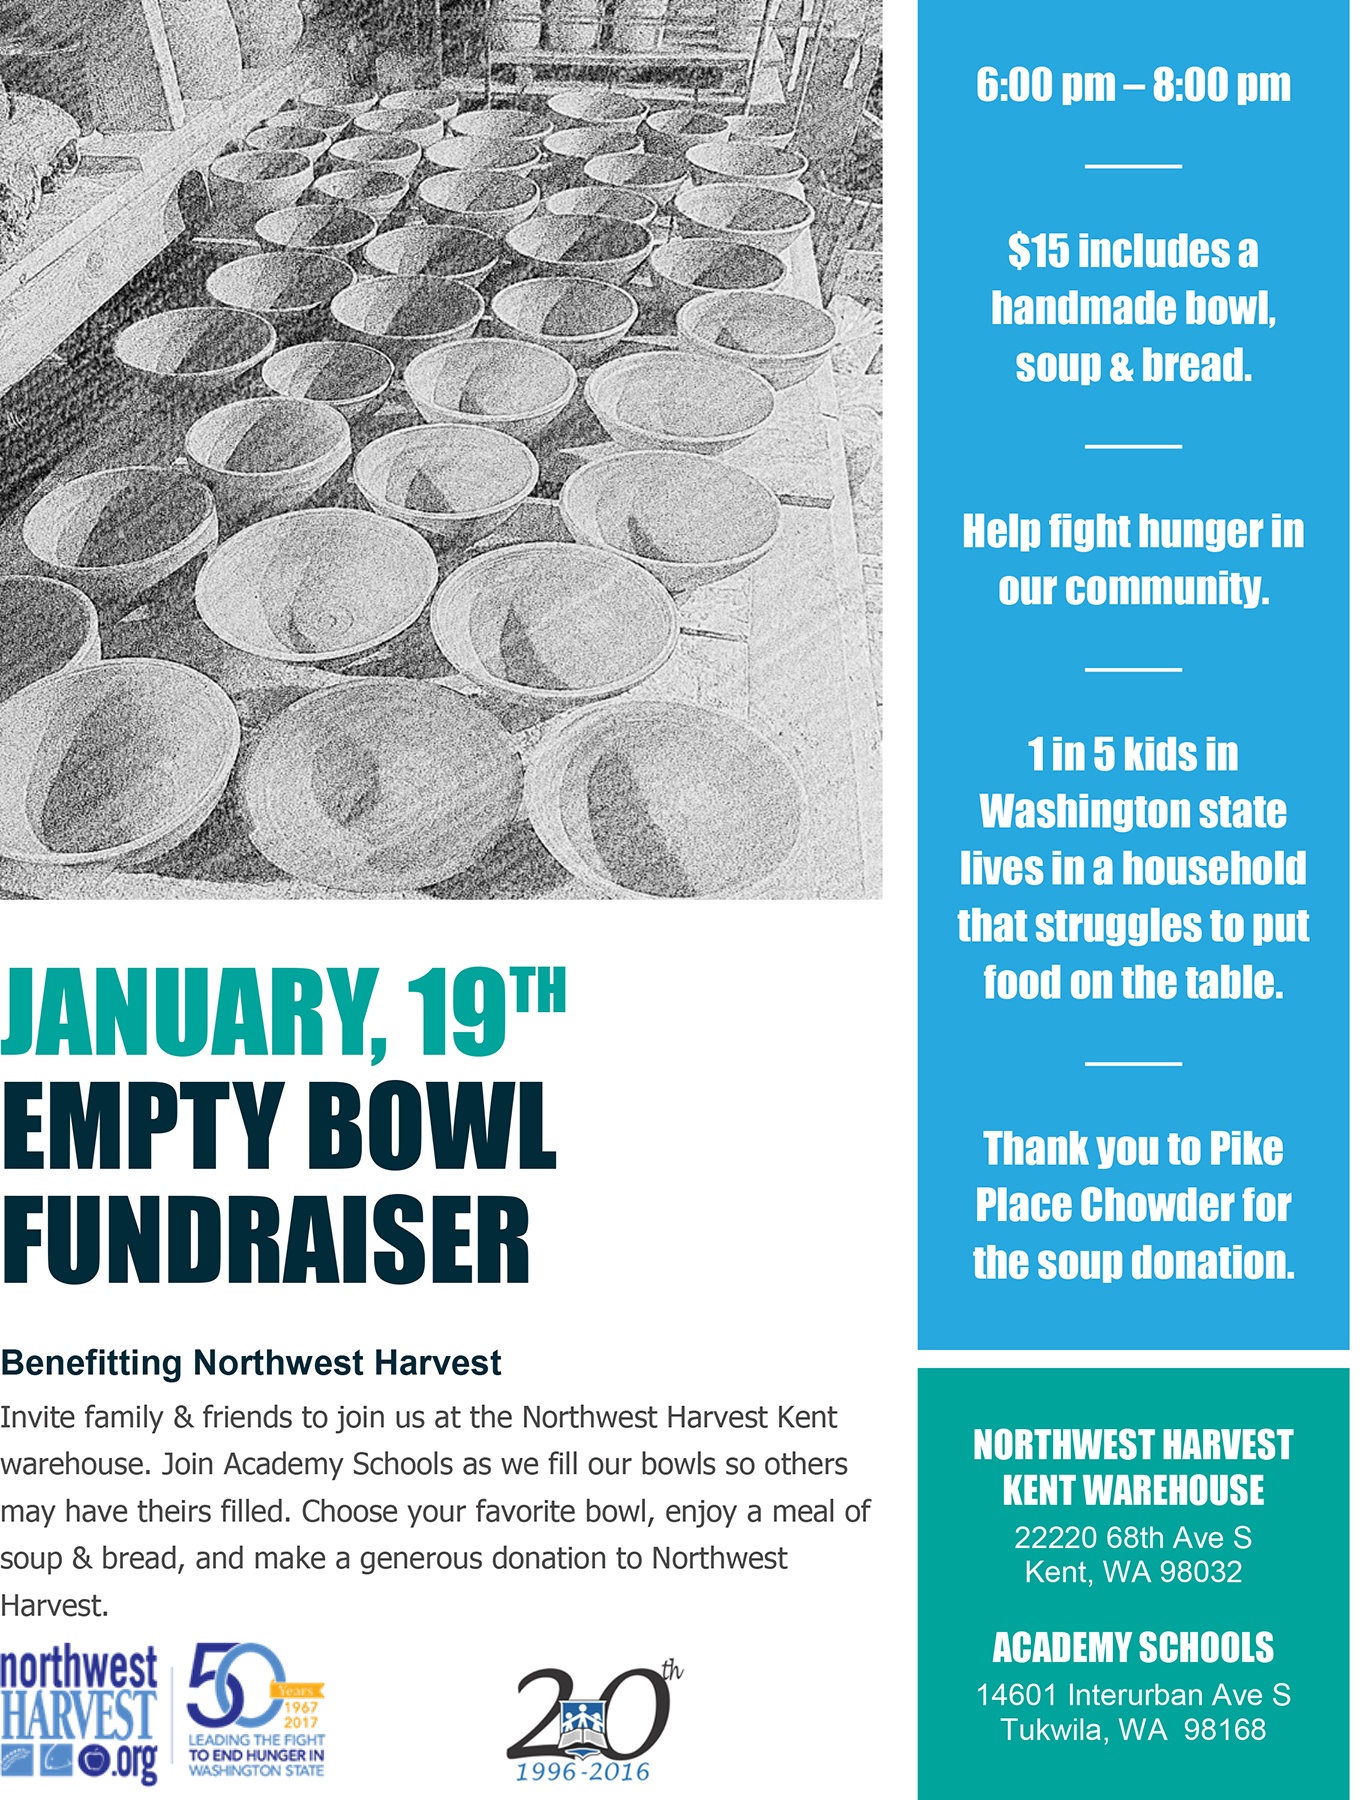 Academy Schools to co-host Empty Bowl at Northwest Harvest in Kent